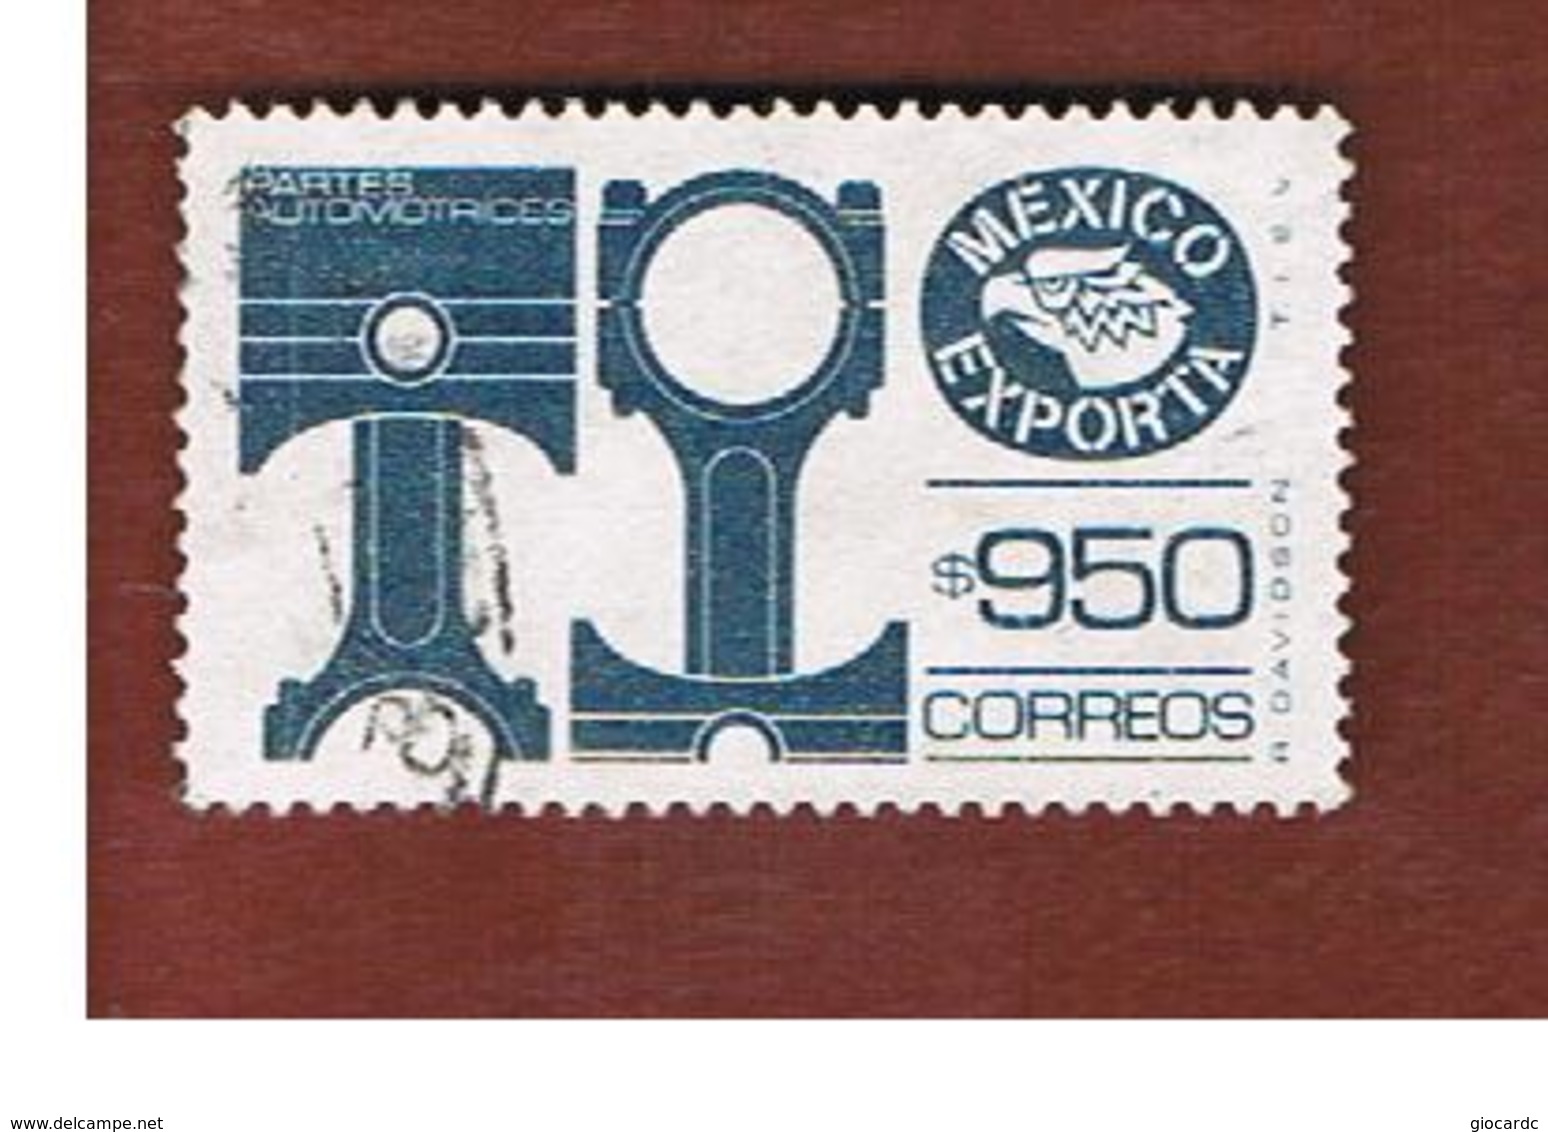 MESSICO (MEXICO) -  SG 1360n   - 1989    MEXICAN EXPORTS:  PISTONS      -  USED° - Messico